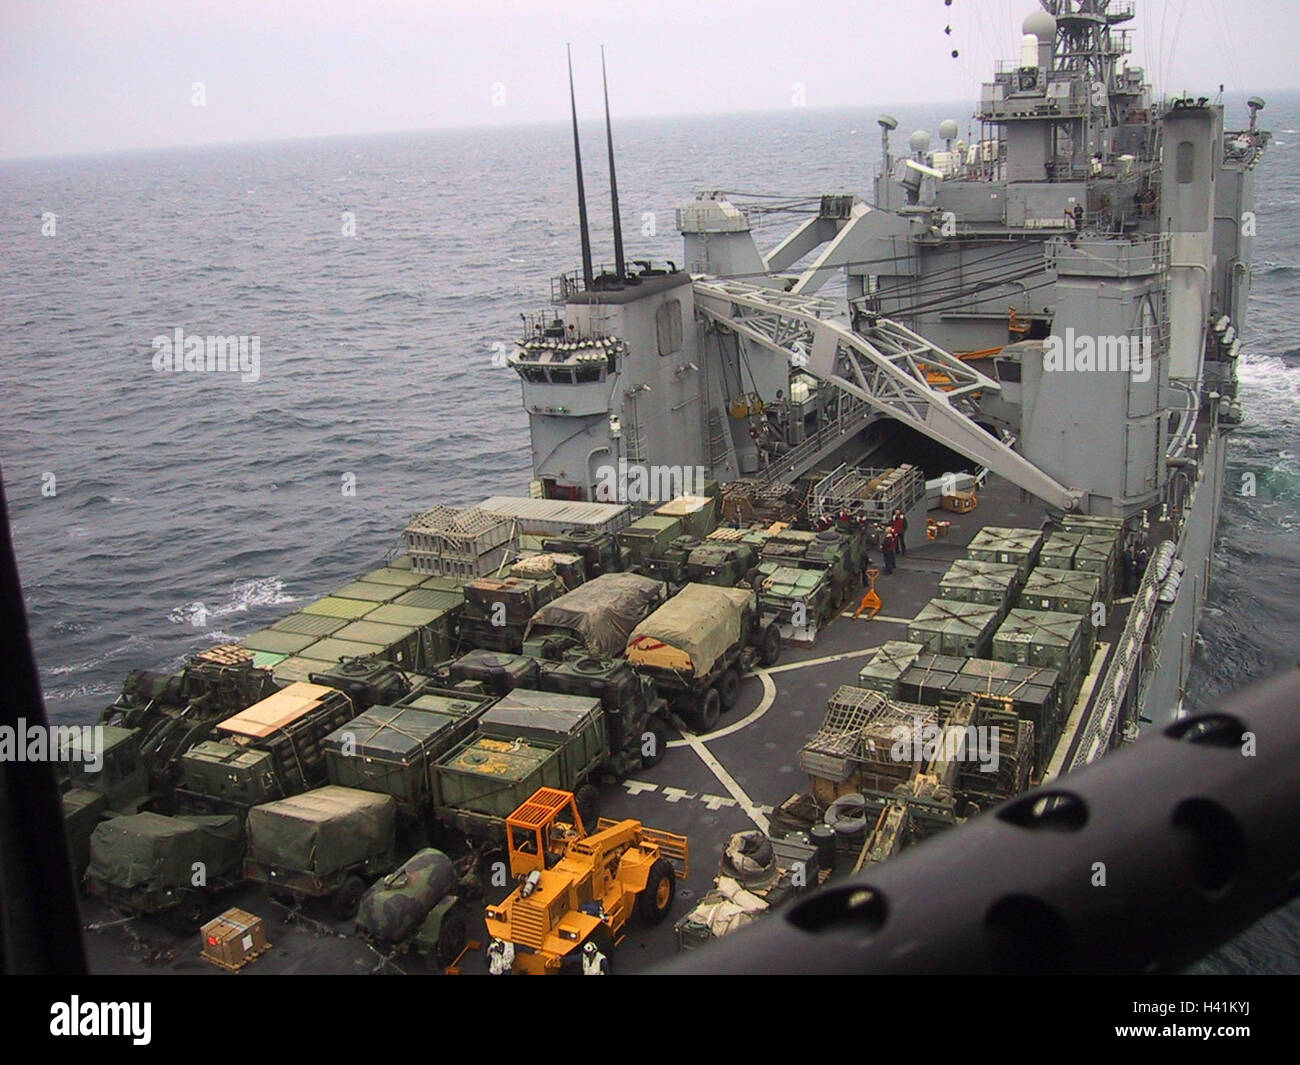 28th January 2003 During Operation Enduring Freedom, the crowded deck of the USS Tortuga (LSD-46), in the Persian Gulf. Stock Photo